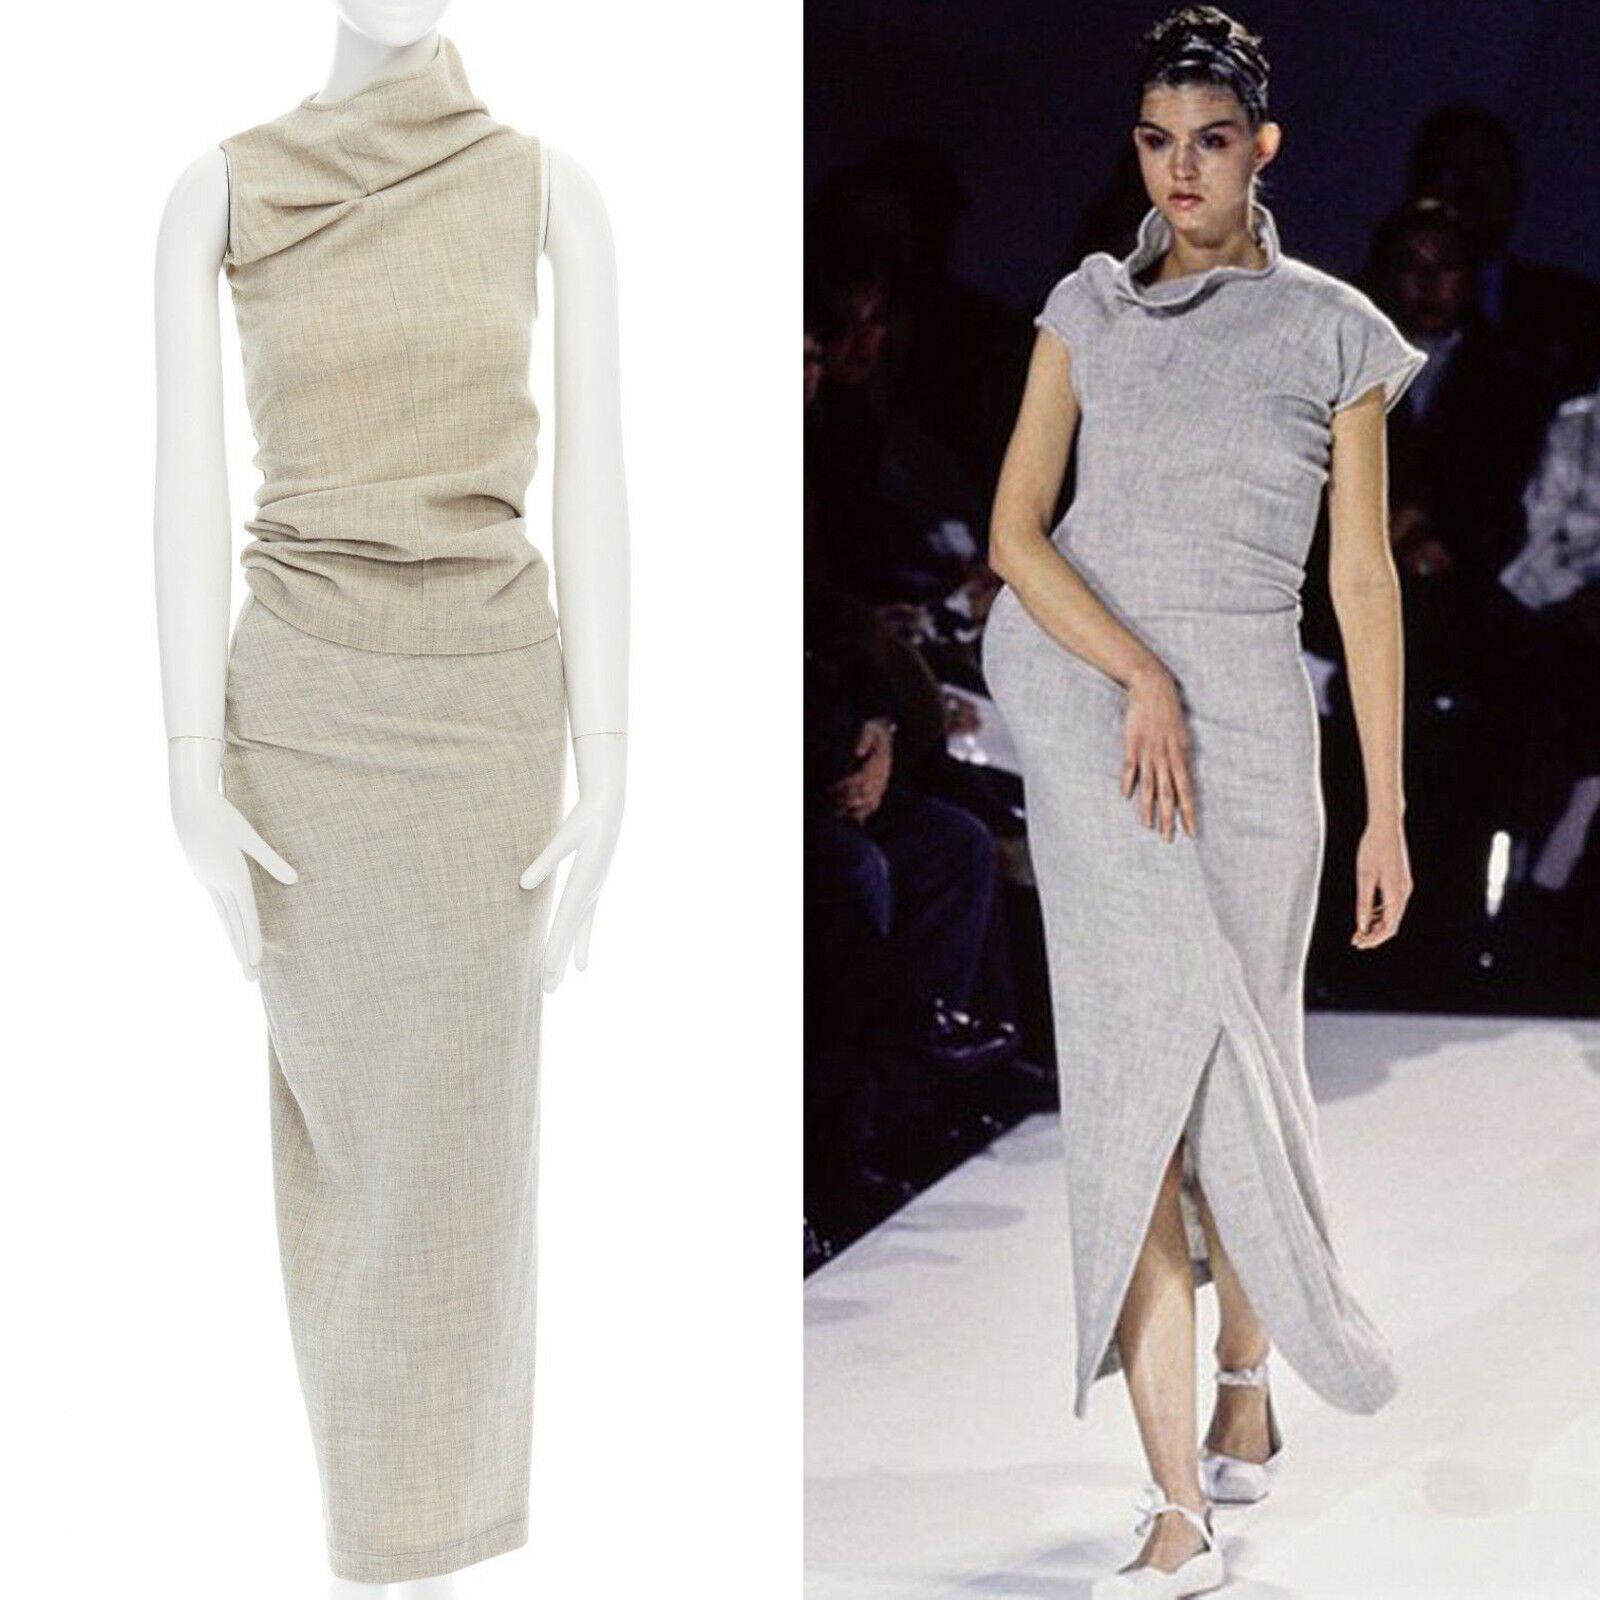 COMME DES GARCONS Vintage SS1997 Lumps & Bumps grey asymmetric top skirt M US6
COMME DES GARCONS
FROM THE ICONIC 1996 LUMPS AND BUMPS COLLECTION
WOOL, NYLON, POLYURETHANE. LIGHT GREYISH BEIGE. 
ASYMMETRIC CUT NECKLINE AND SLEEVES. SEA M DOWN CENTER